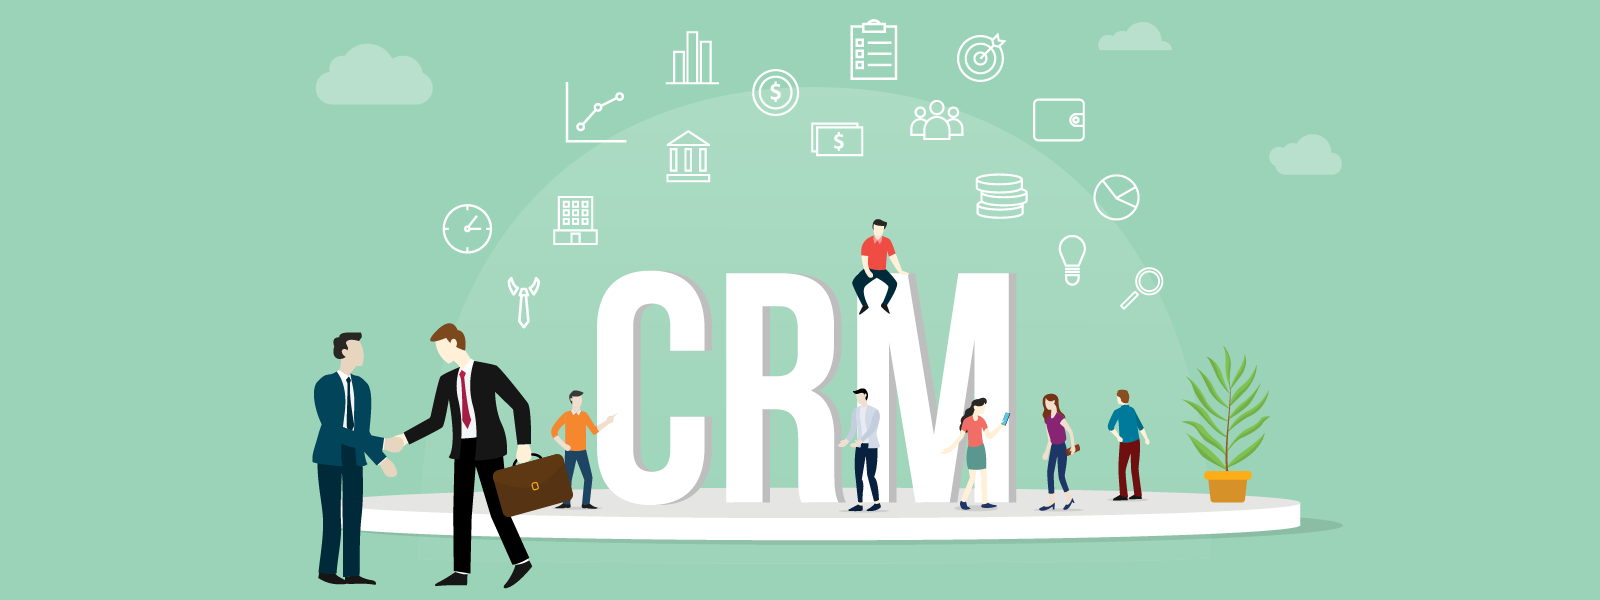 Use of CRM in the Government Industry